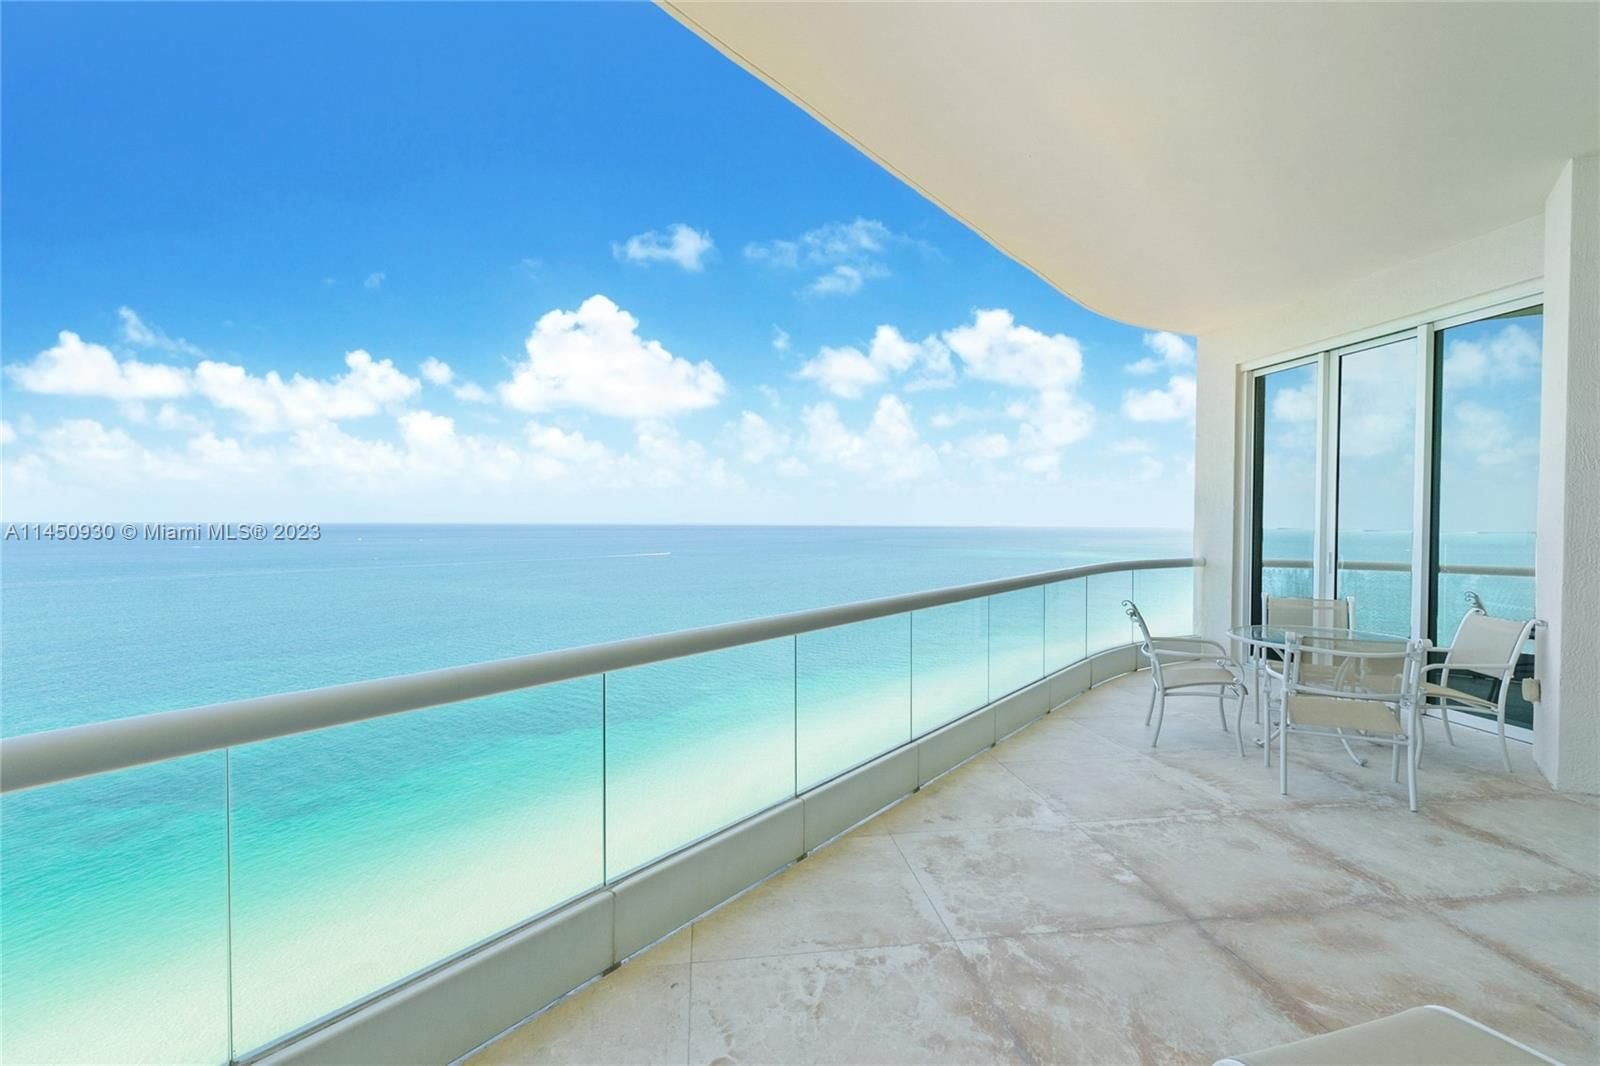 Real estate property located at 16047 Collins Ave #3303, Miami-Dade County, TURNBERRY OCEAN COLONY SO, Sunny Isles Beach, FL